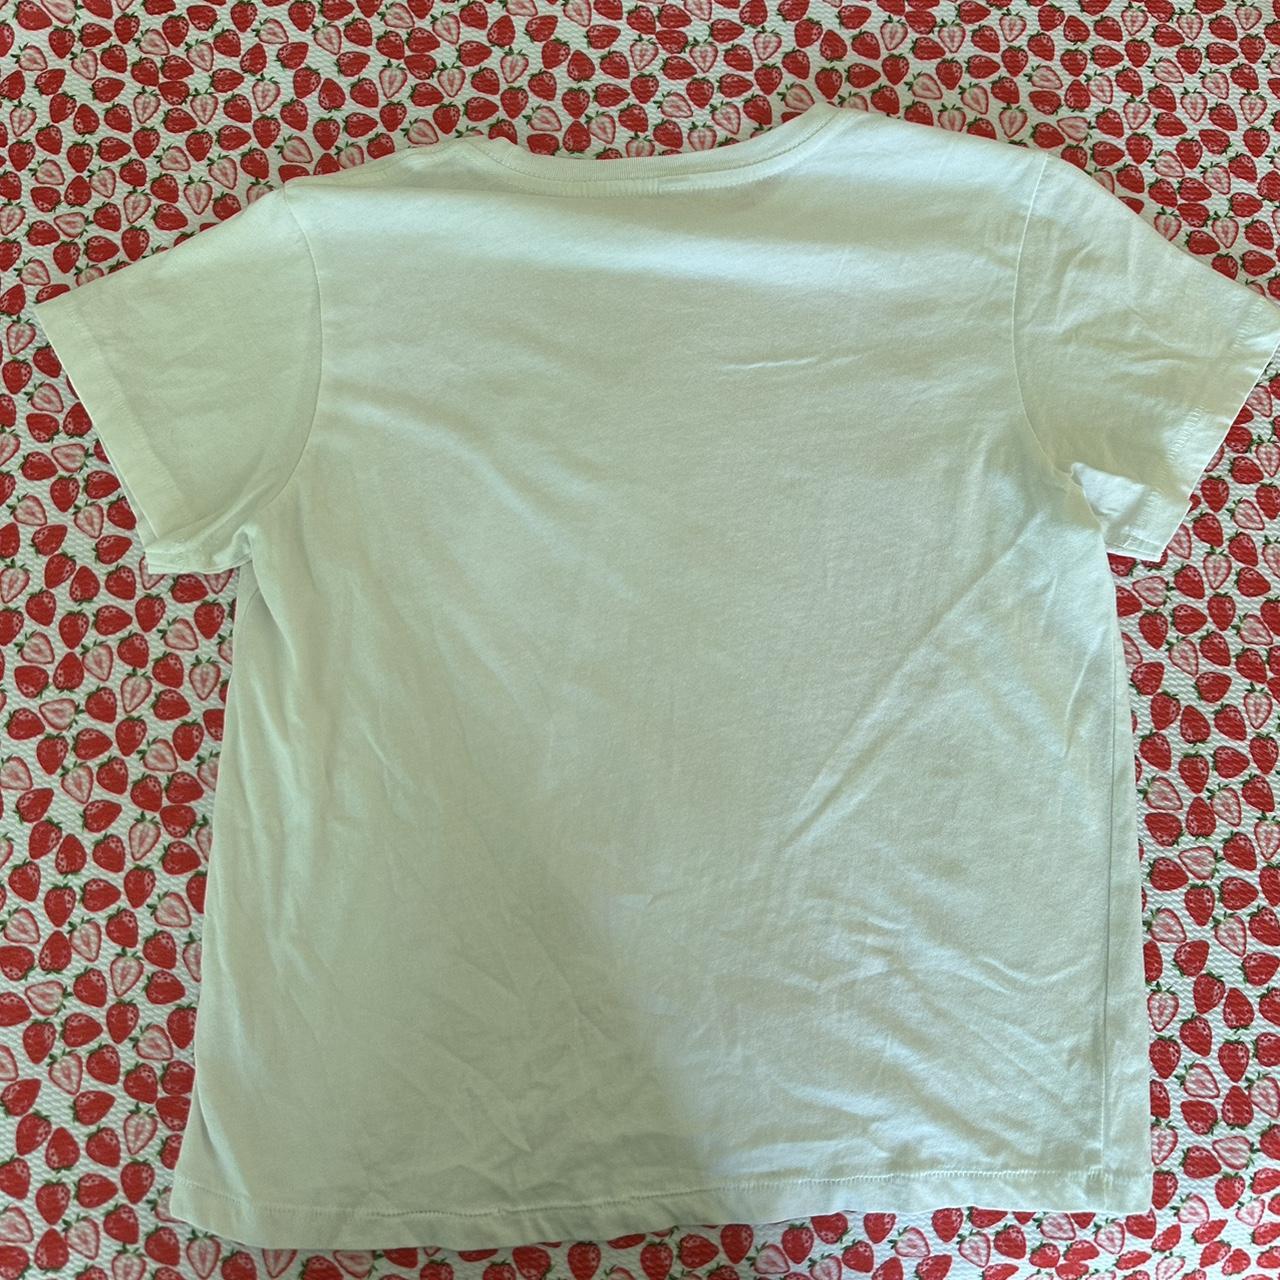 Women's White and Red T-shirt | Depop